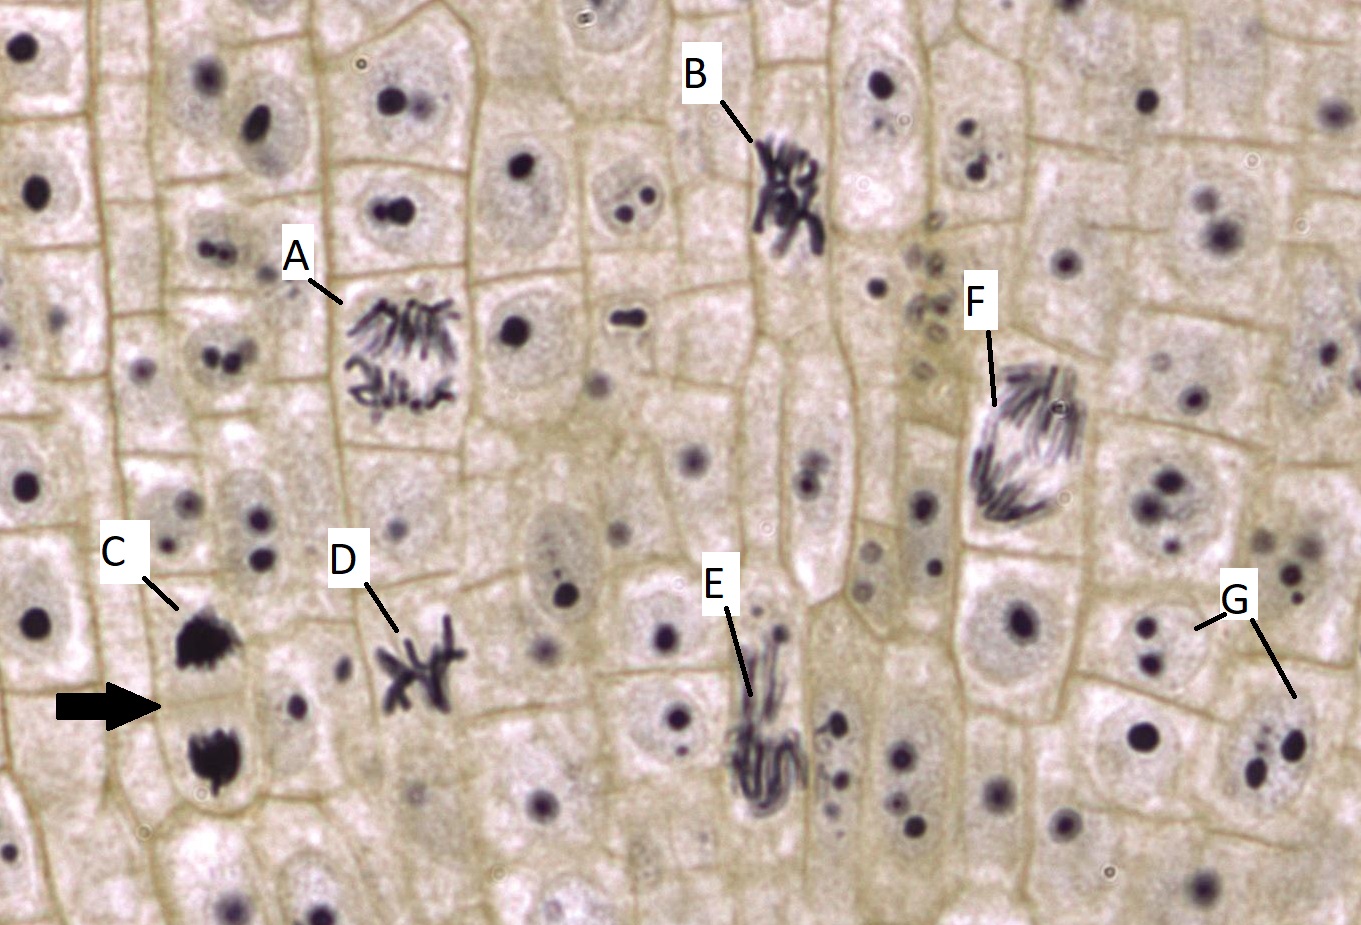 Cells in many stages of mitosis. One, indicated by a black arrow, is in telophase.